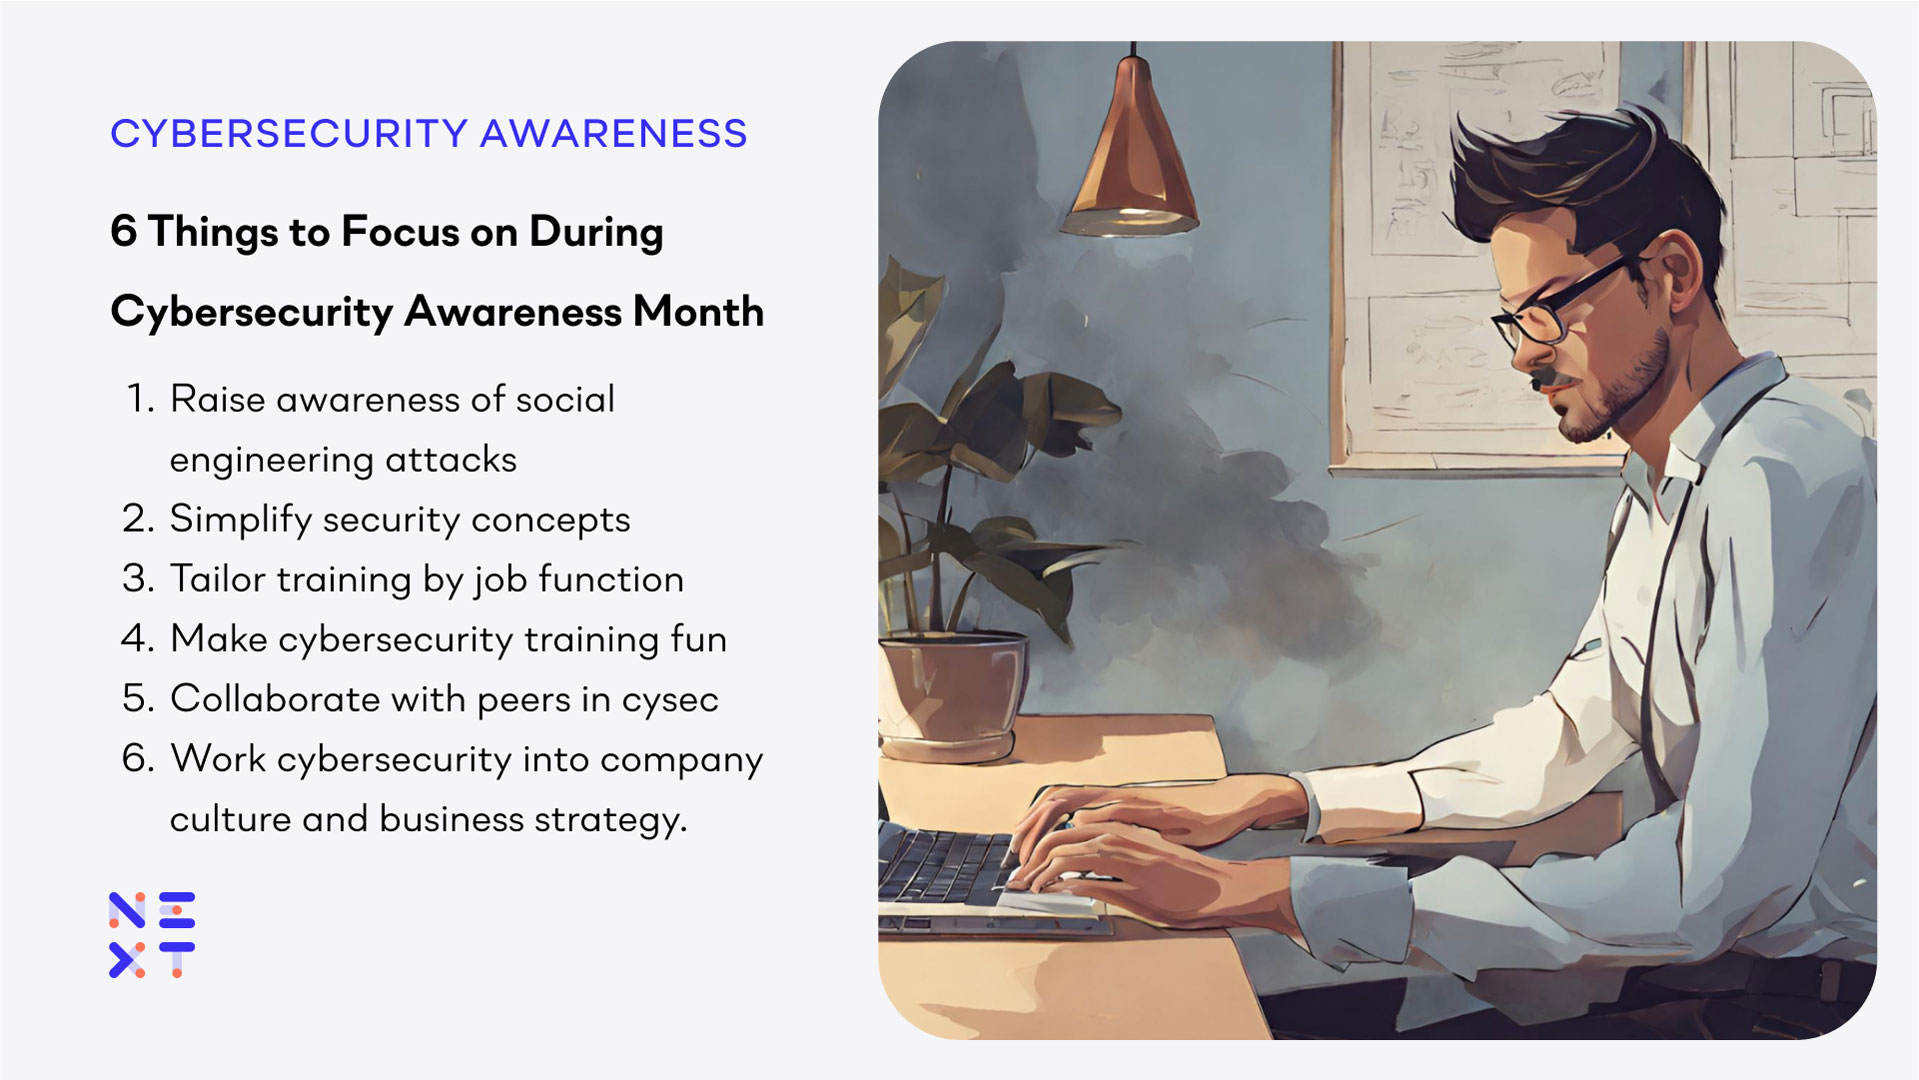 6 things to focus on during Cybersecurity Awareness Month